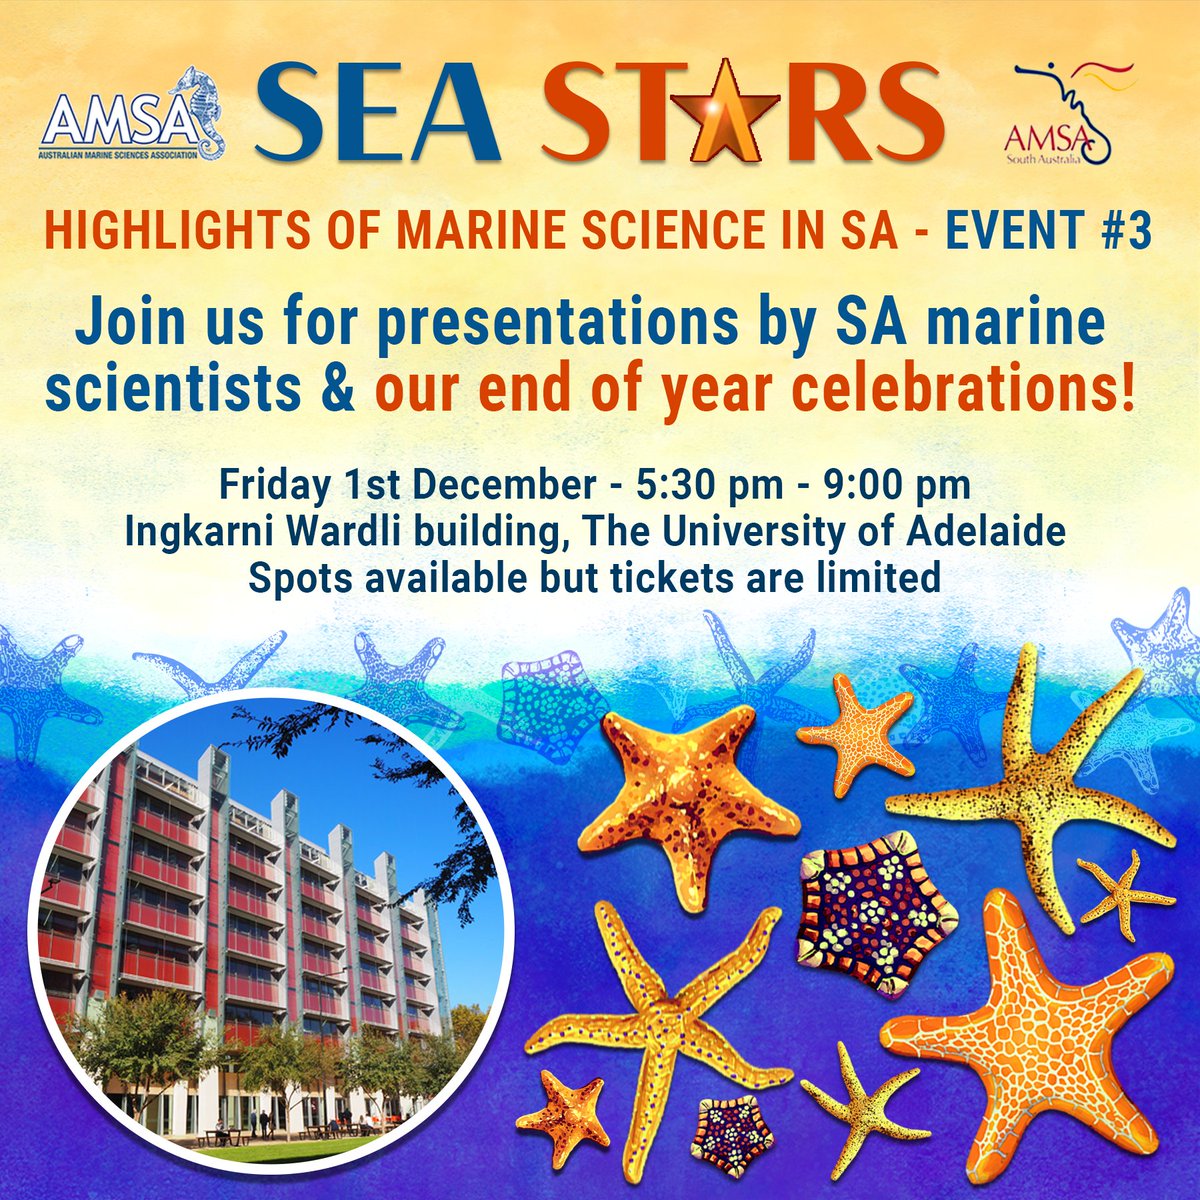 It's nearly time! 🌟⭐️✨ 'Sea Stars' Event #3 will be held this Friday 1st December at The University of Adelaide! Eat, drink & mingle during our end of year social mixer 🥂 We have amazing presenters lined up, so don't miss out. Tickets are limited: bit.ly/3QtdELv